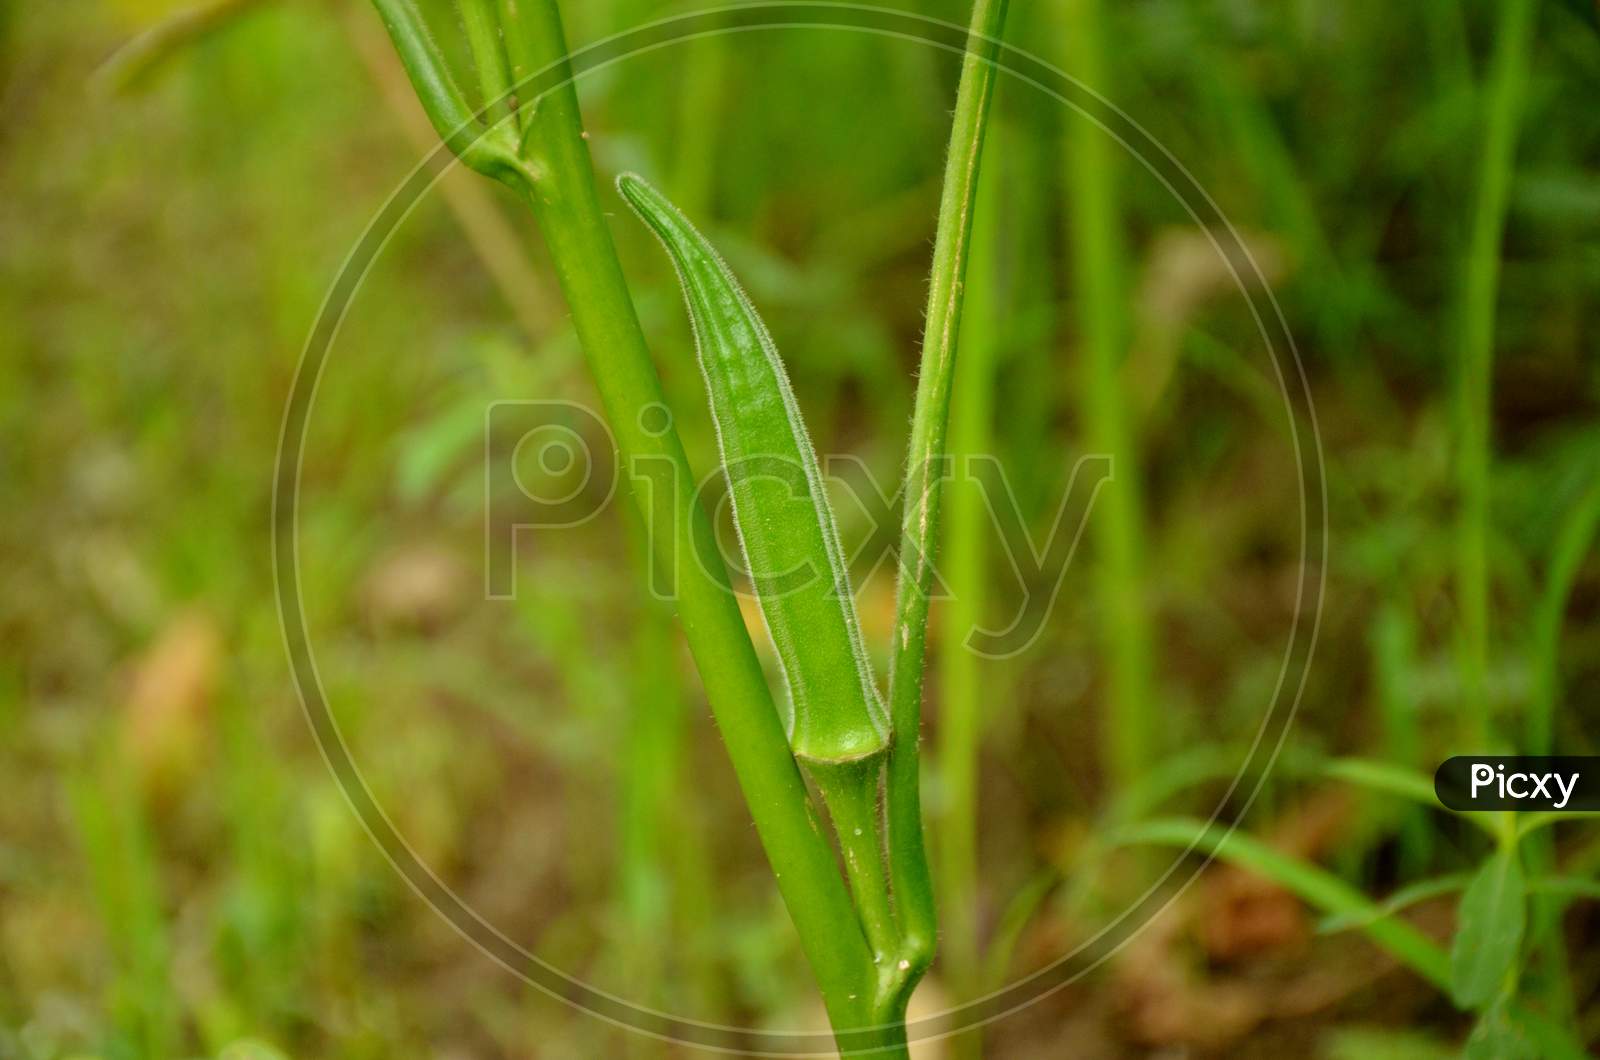 the ripe green ladyfinger with plant